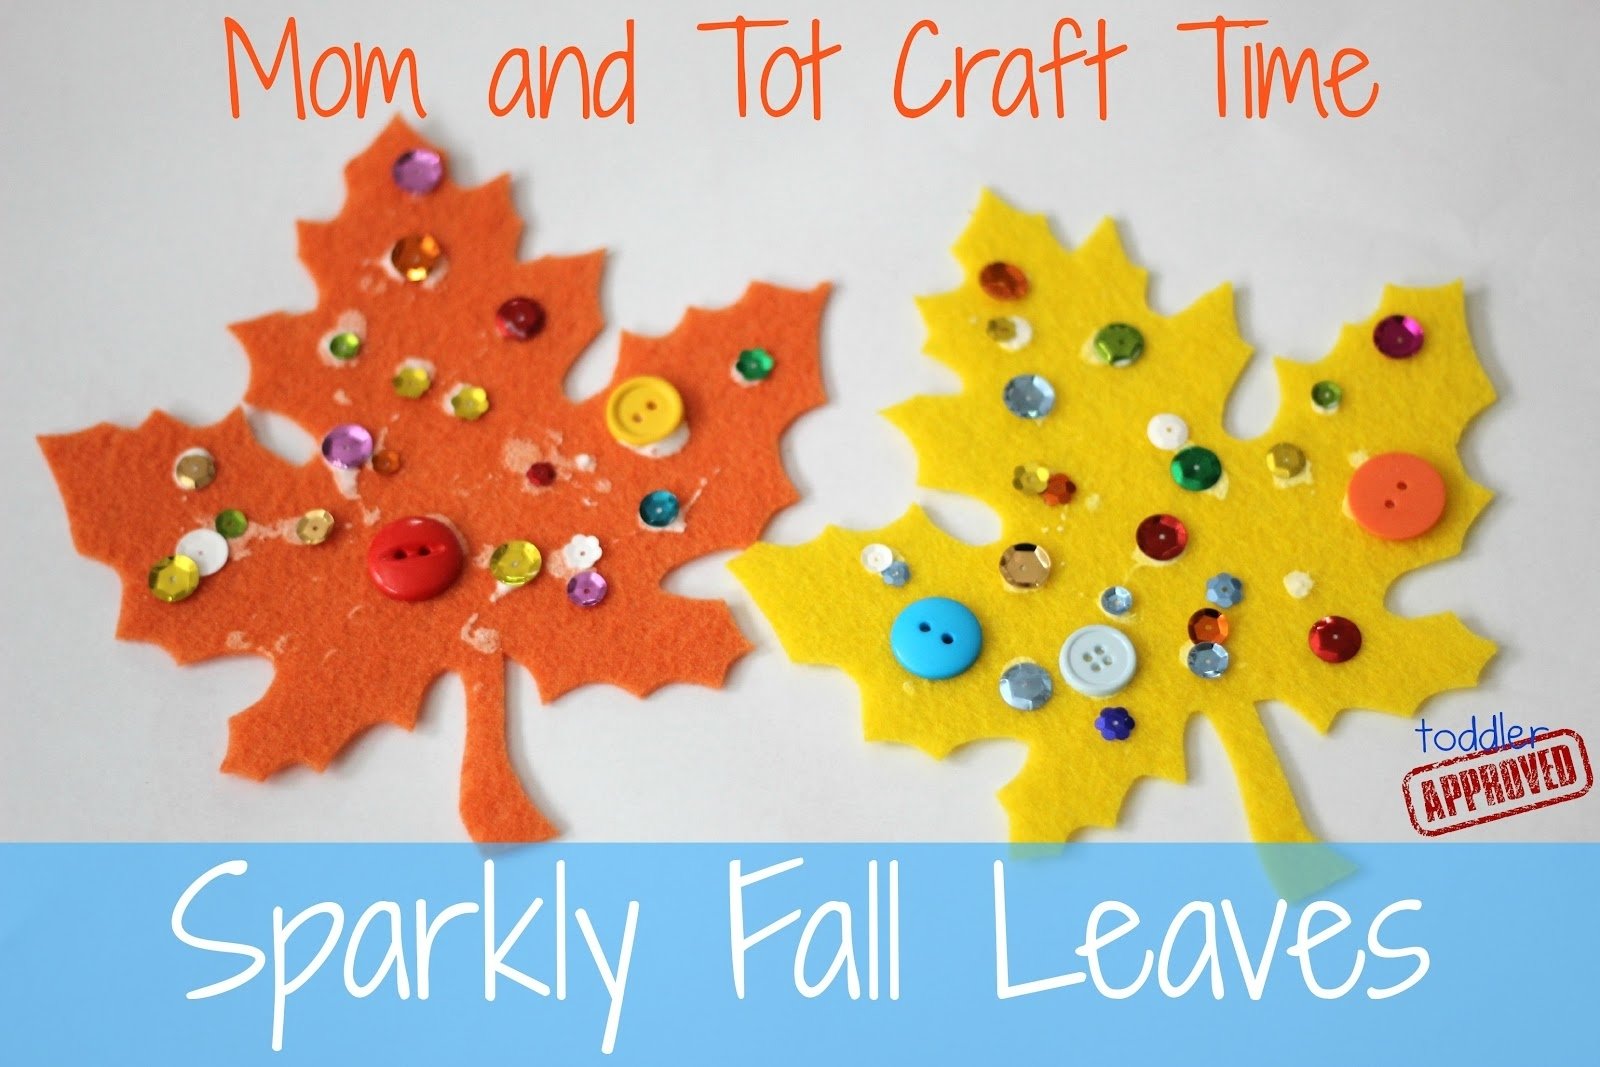 10 Awesome Fall Craft Ideas For Toddlers toddler approved mom and tot craft time sparkly fall leaves 2022